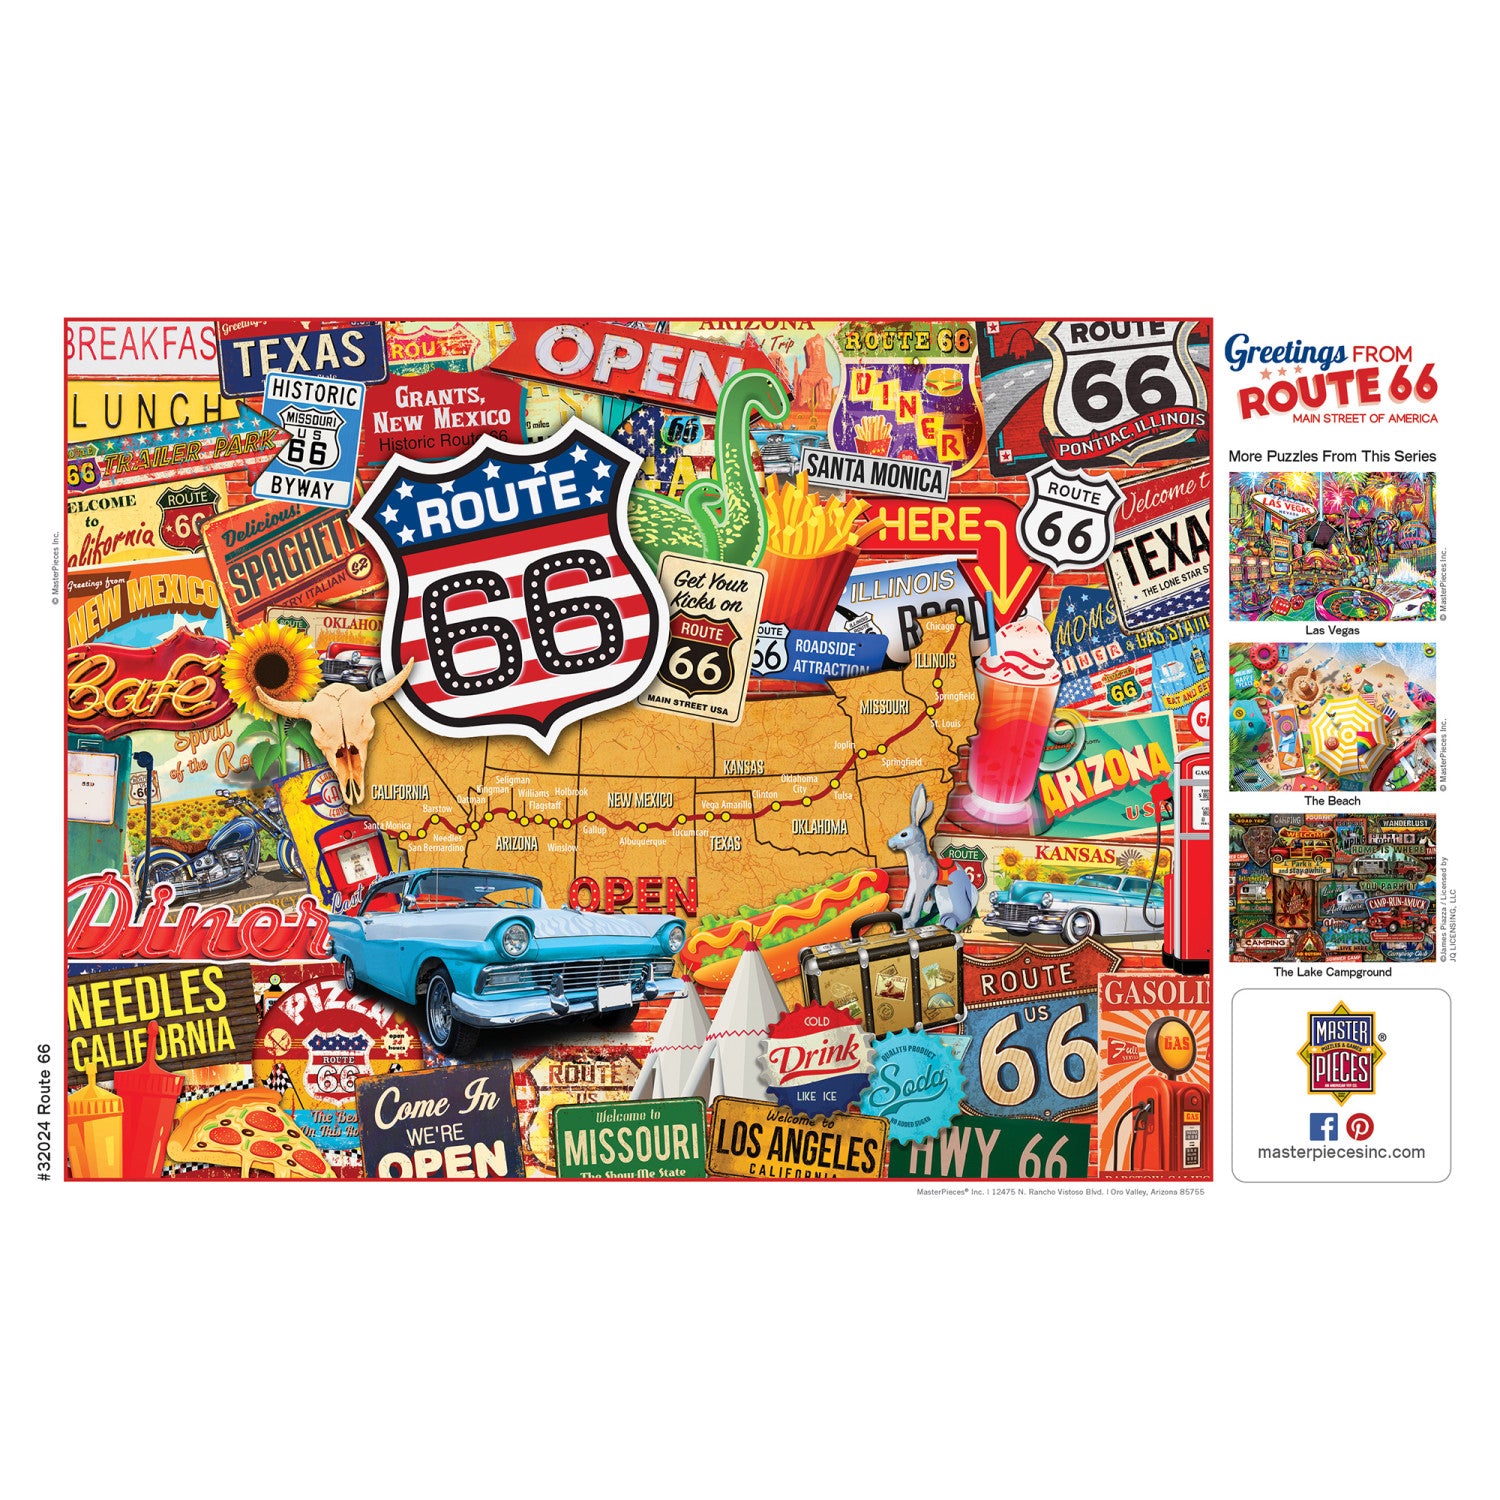 Greetings From Route 66 - 550 Piece Puzzle